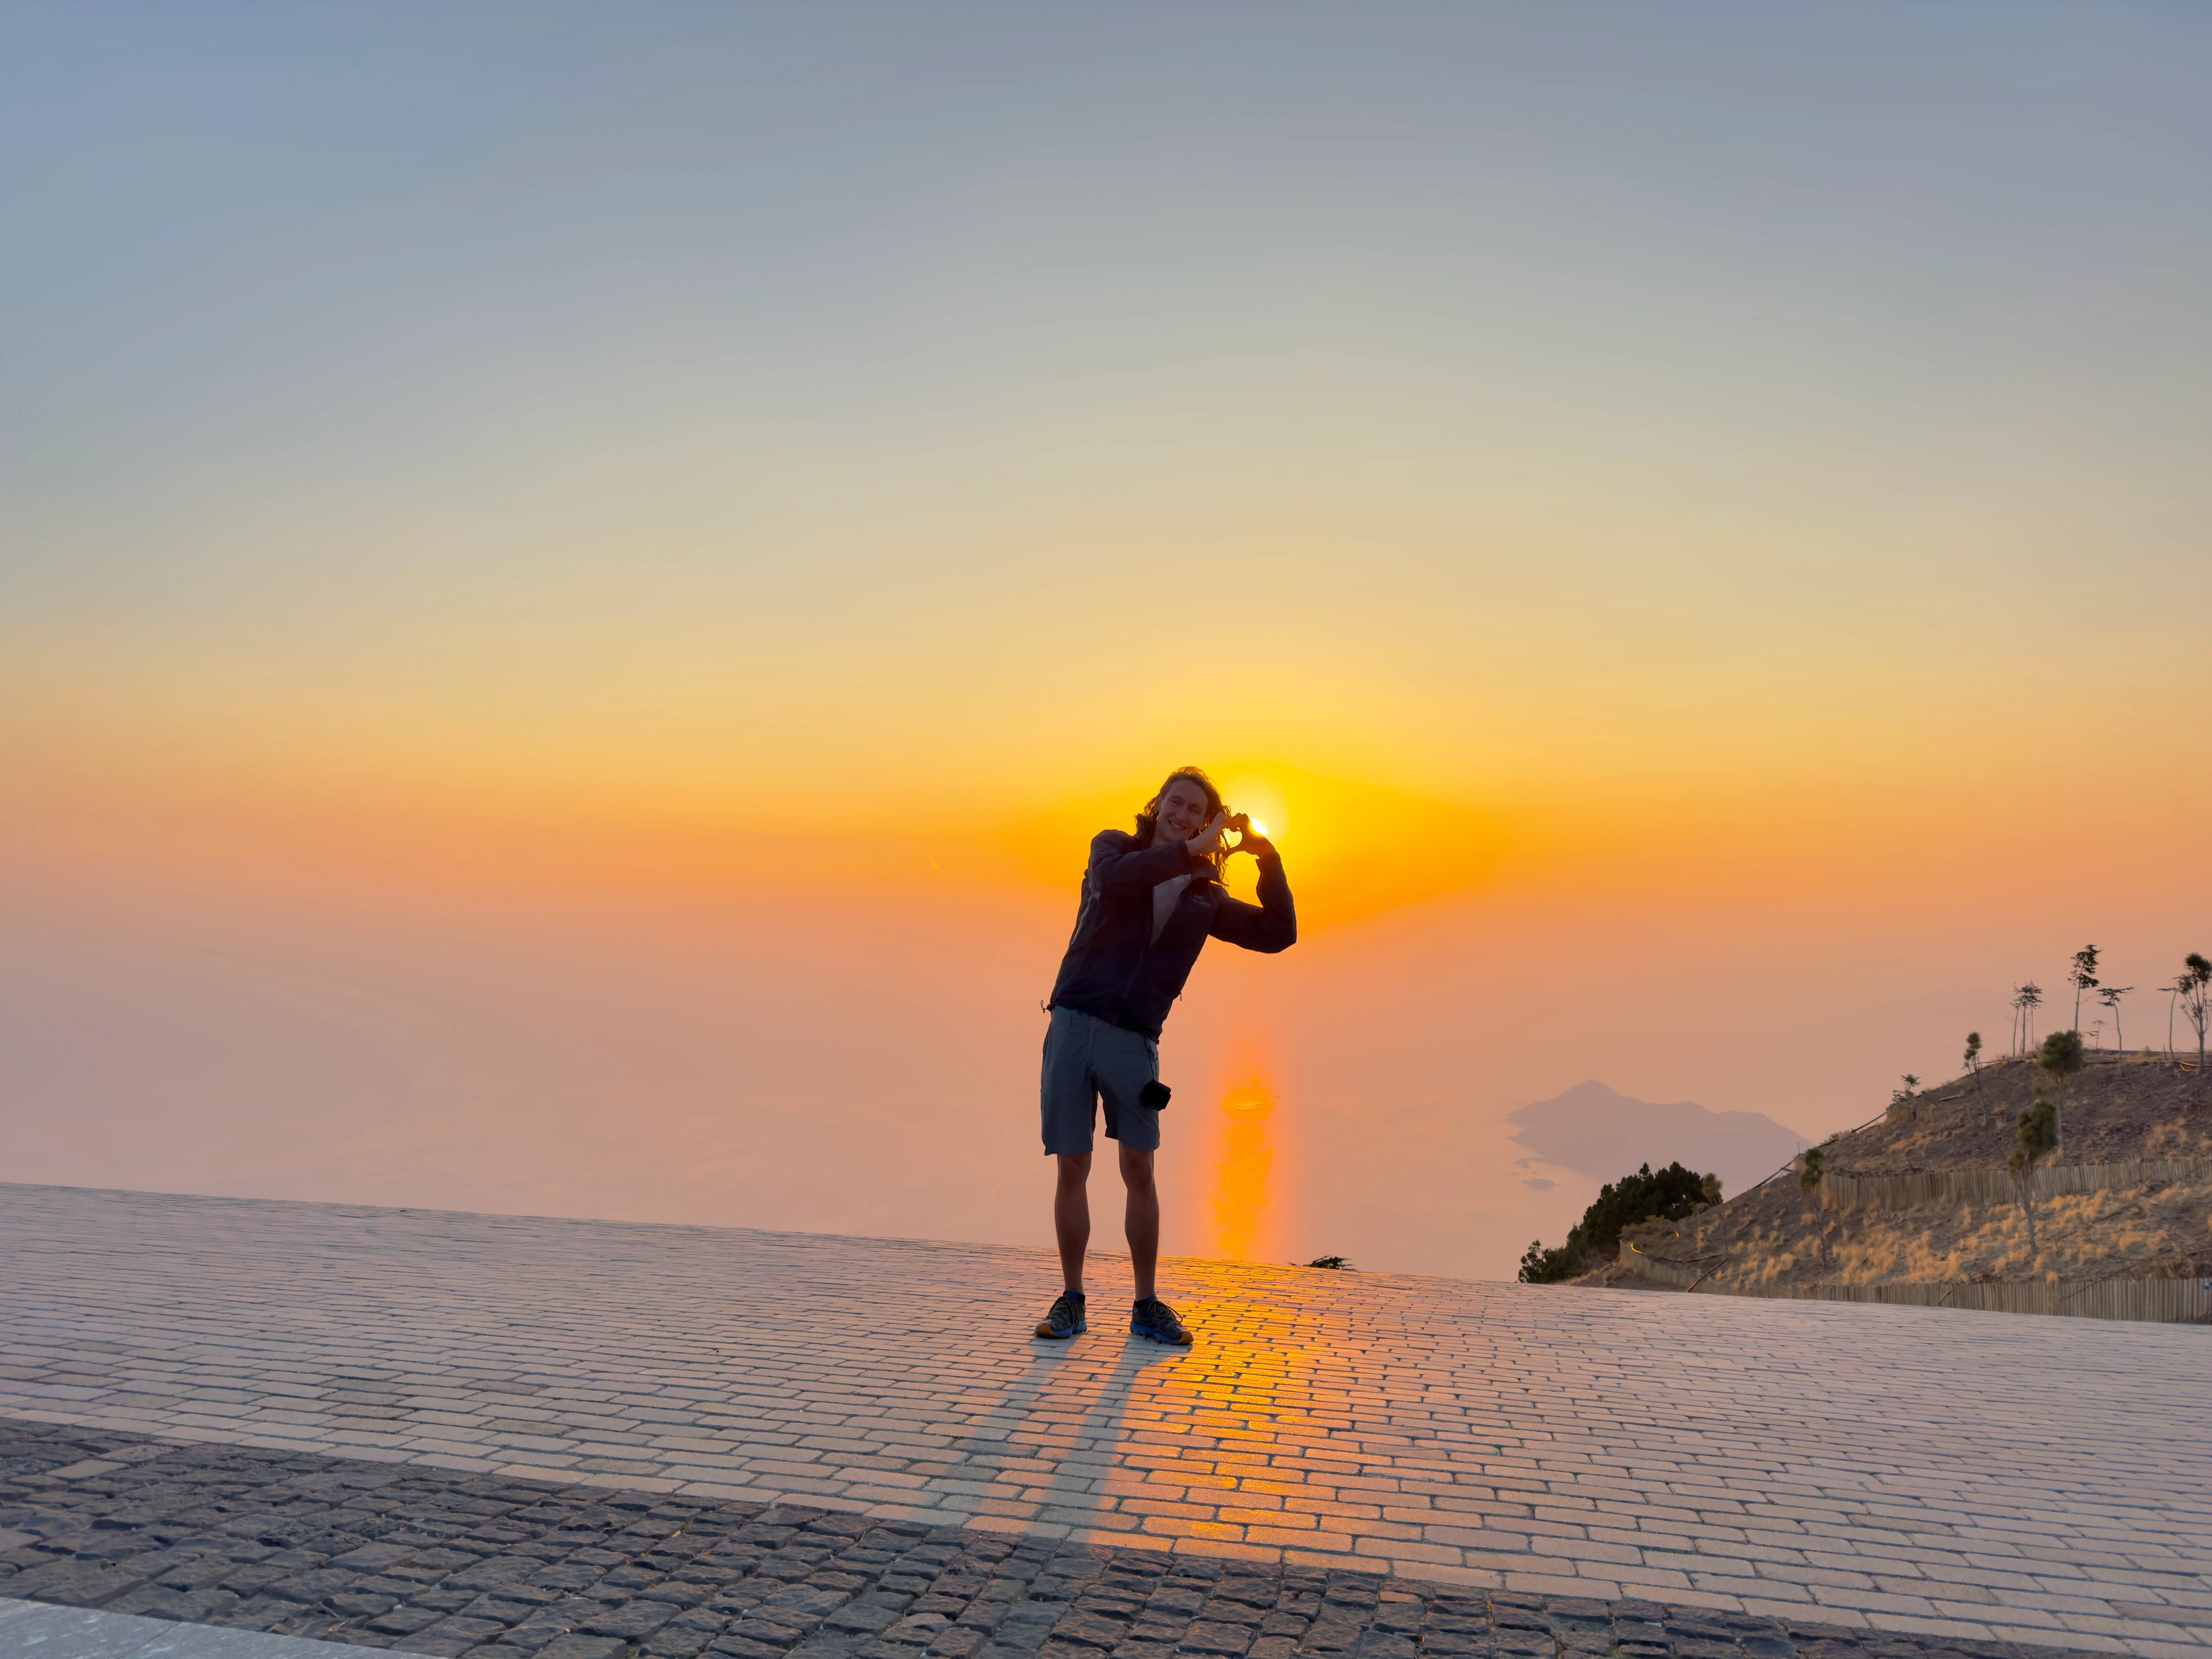 me on launch in Ölüdeniz making a heart with the sunset in the background